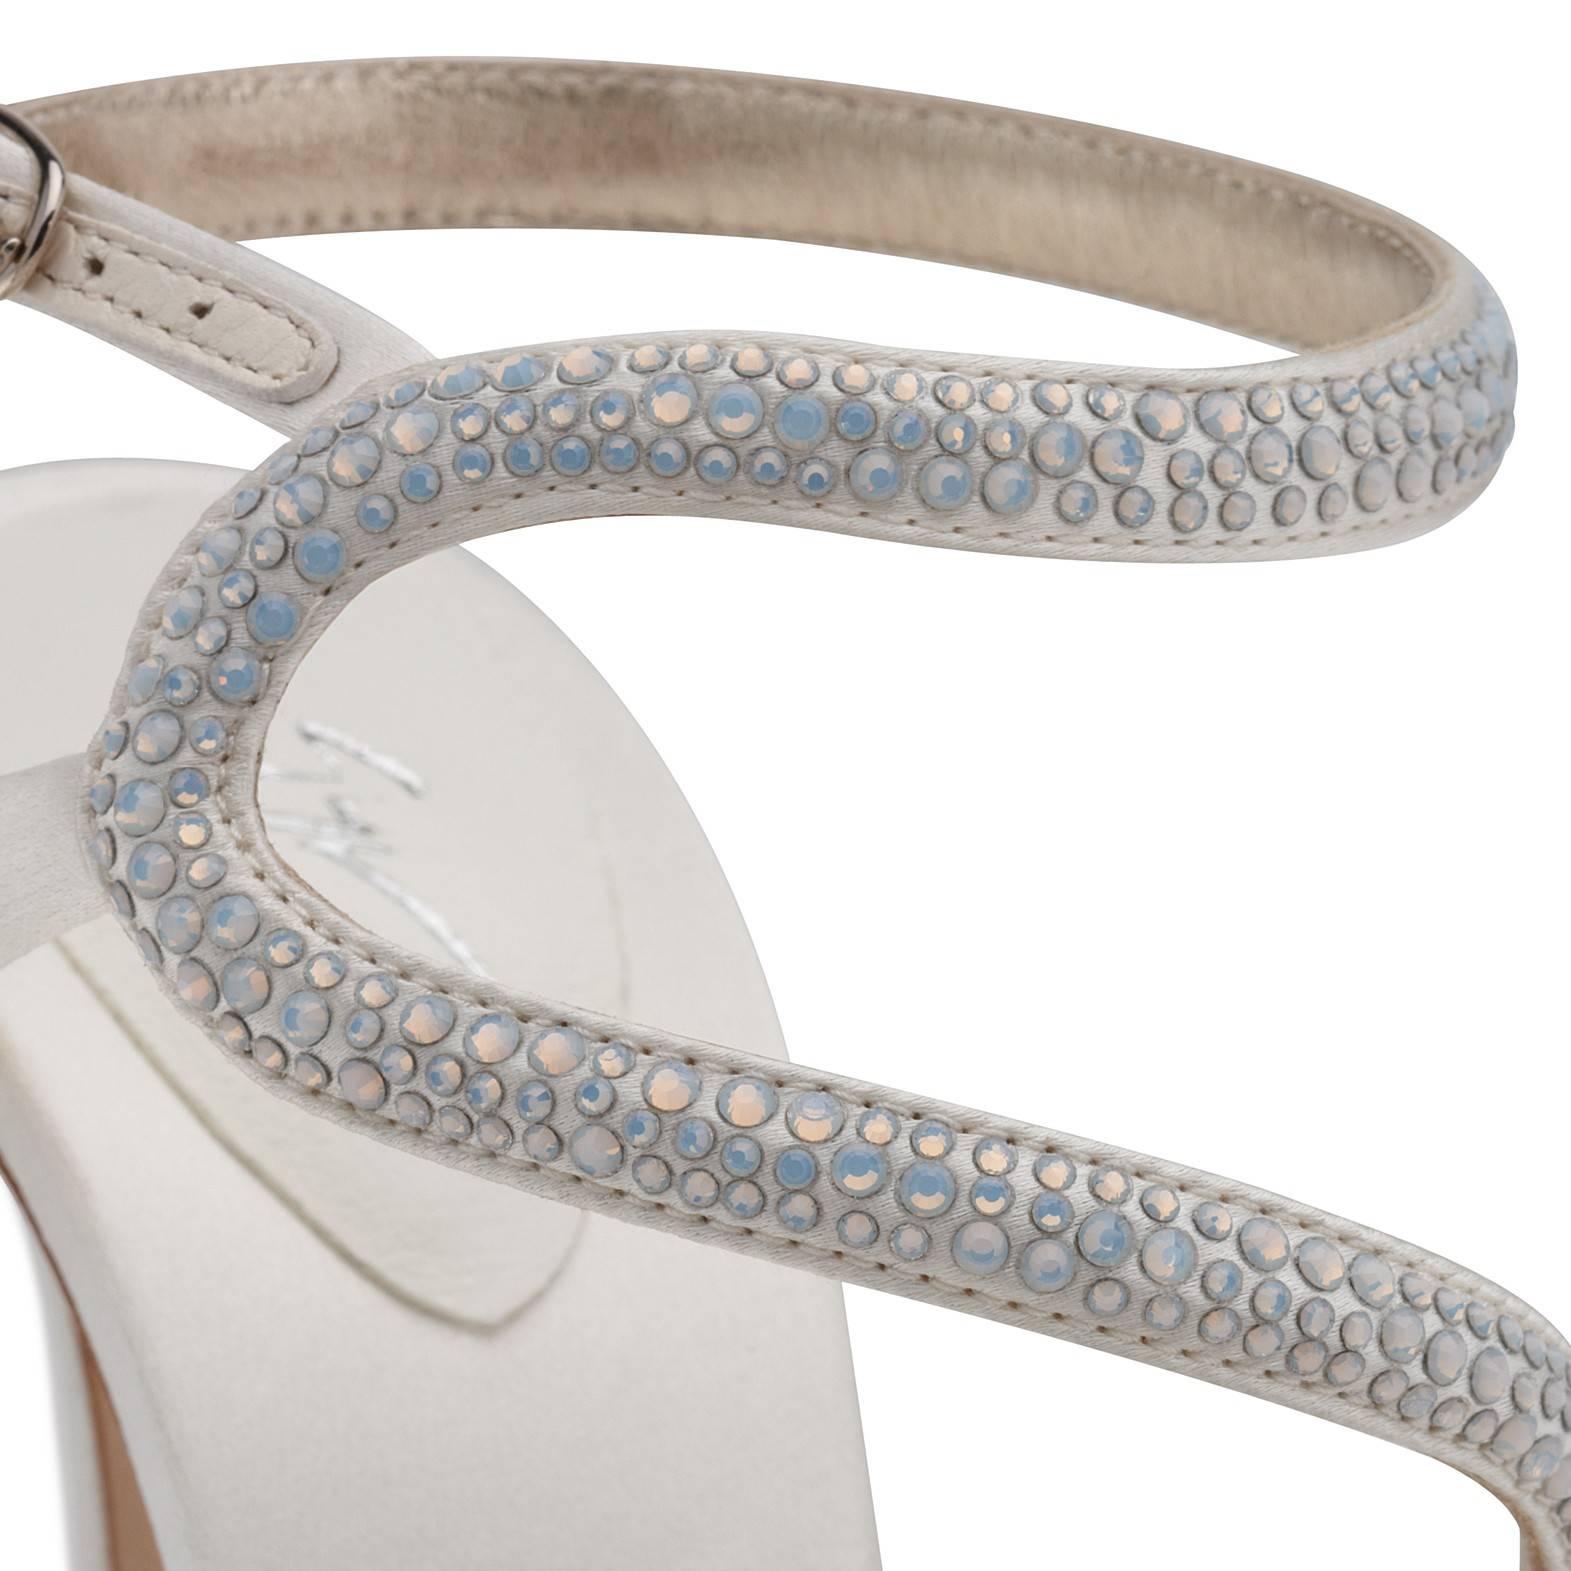 Giuseppe Zanotti New White Satin Crystal Snake Evening Sandals Heels in Box

Size IT 36
Satin
Crystal
Ankle strap closure
Made in Italy 
Heel height 4.5